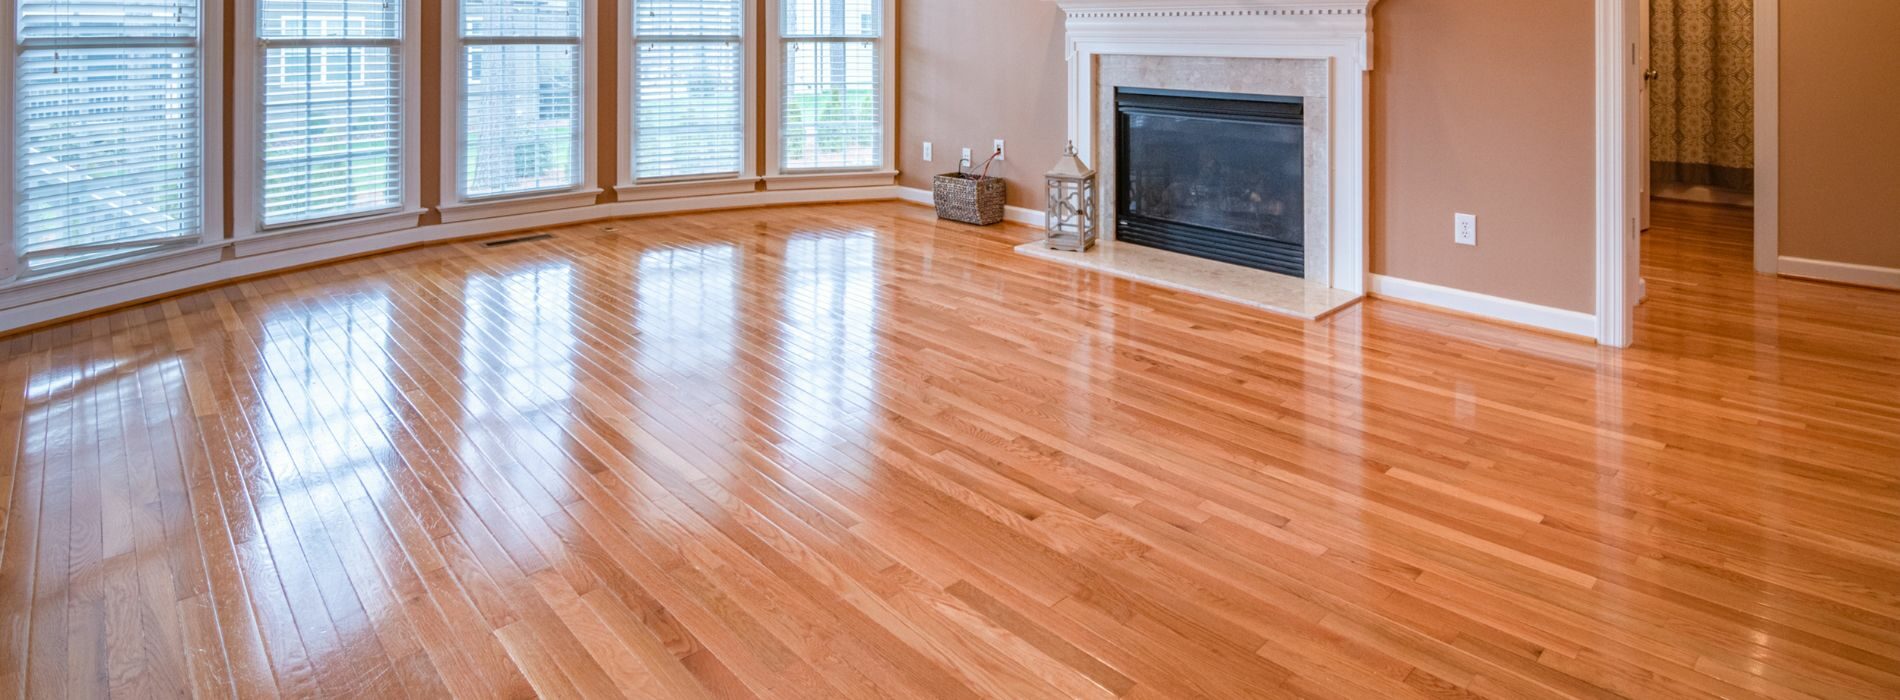 Experience the transformation of an 8-year-old hardwood floor in Barkingside, IG6 by Mr Sander®. Bona 2.2K Frost whitewashing and Traffic HD matte lacquer create a durable, low sheen finish. Embrace timeless elegance with our exceptional floor restoration services.